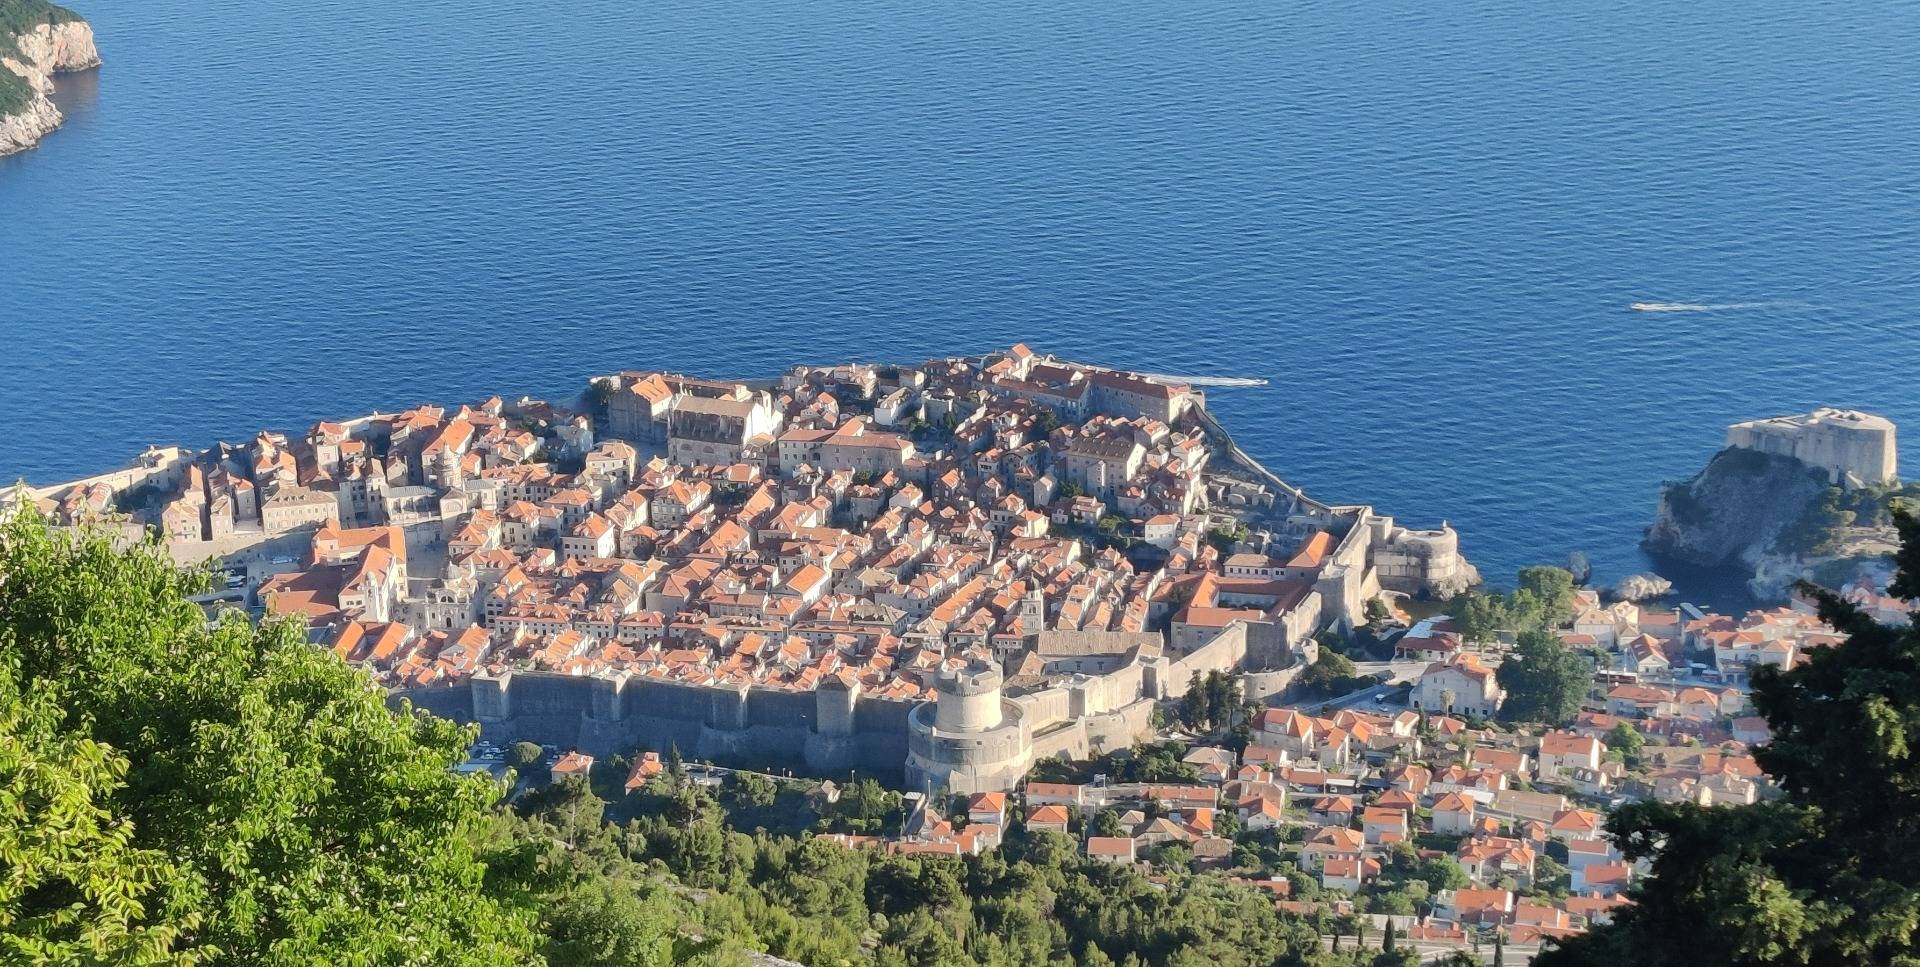 Overview of Dubrovnik old town